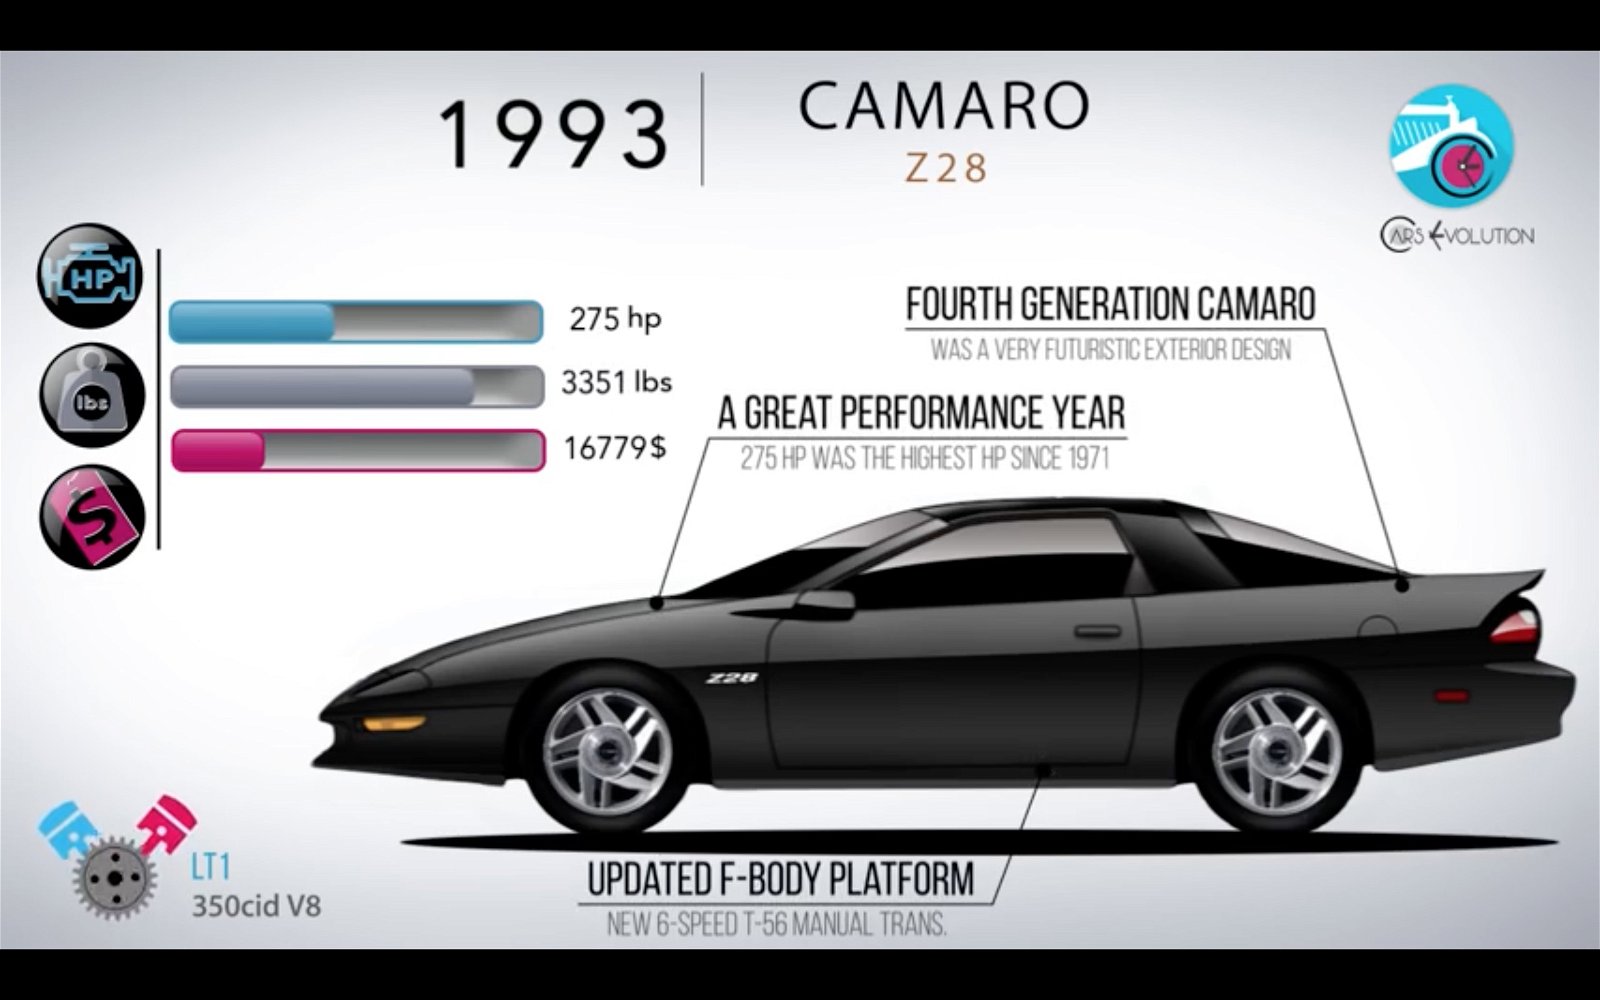 The evolution of the Chevrolet Camaro | DriveMag Cars